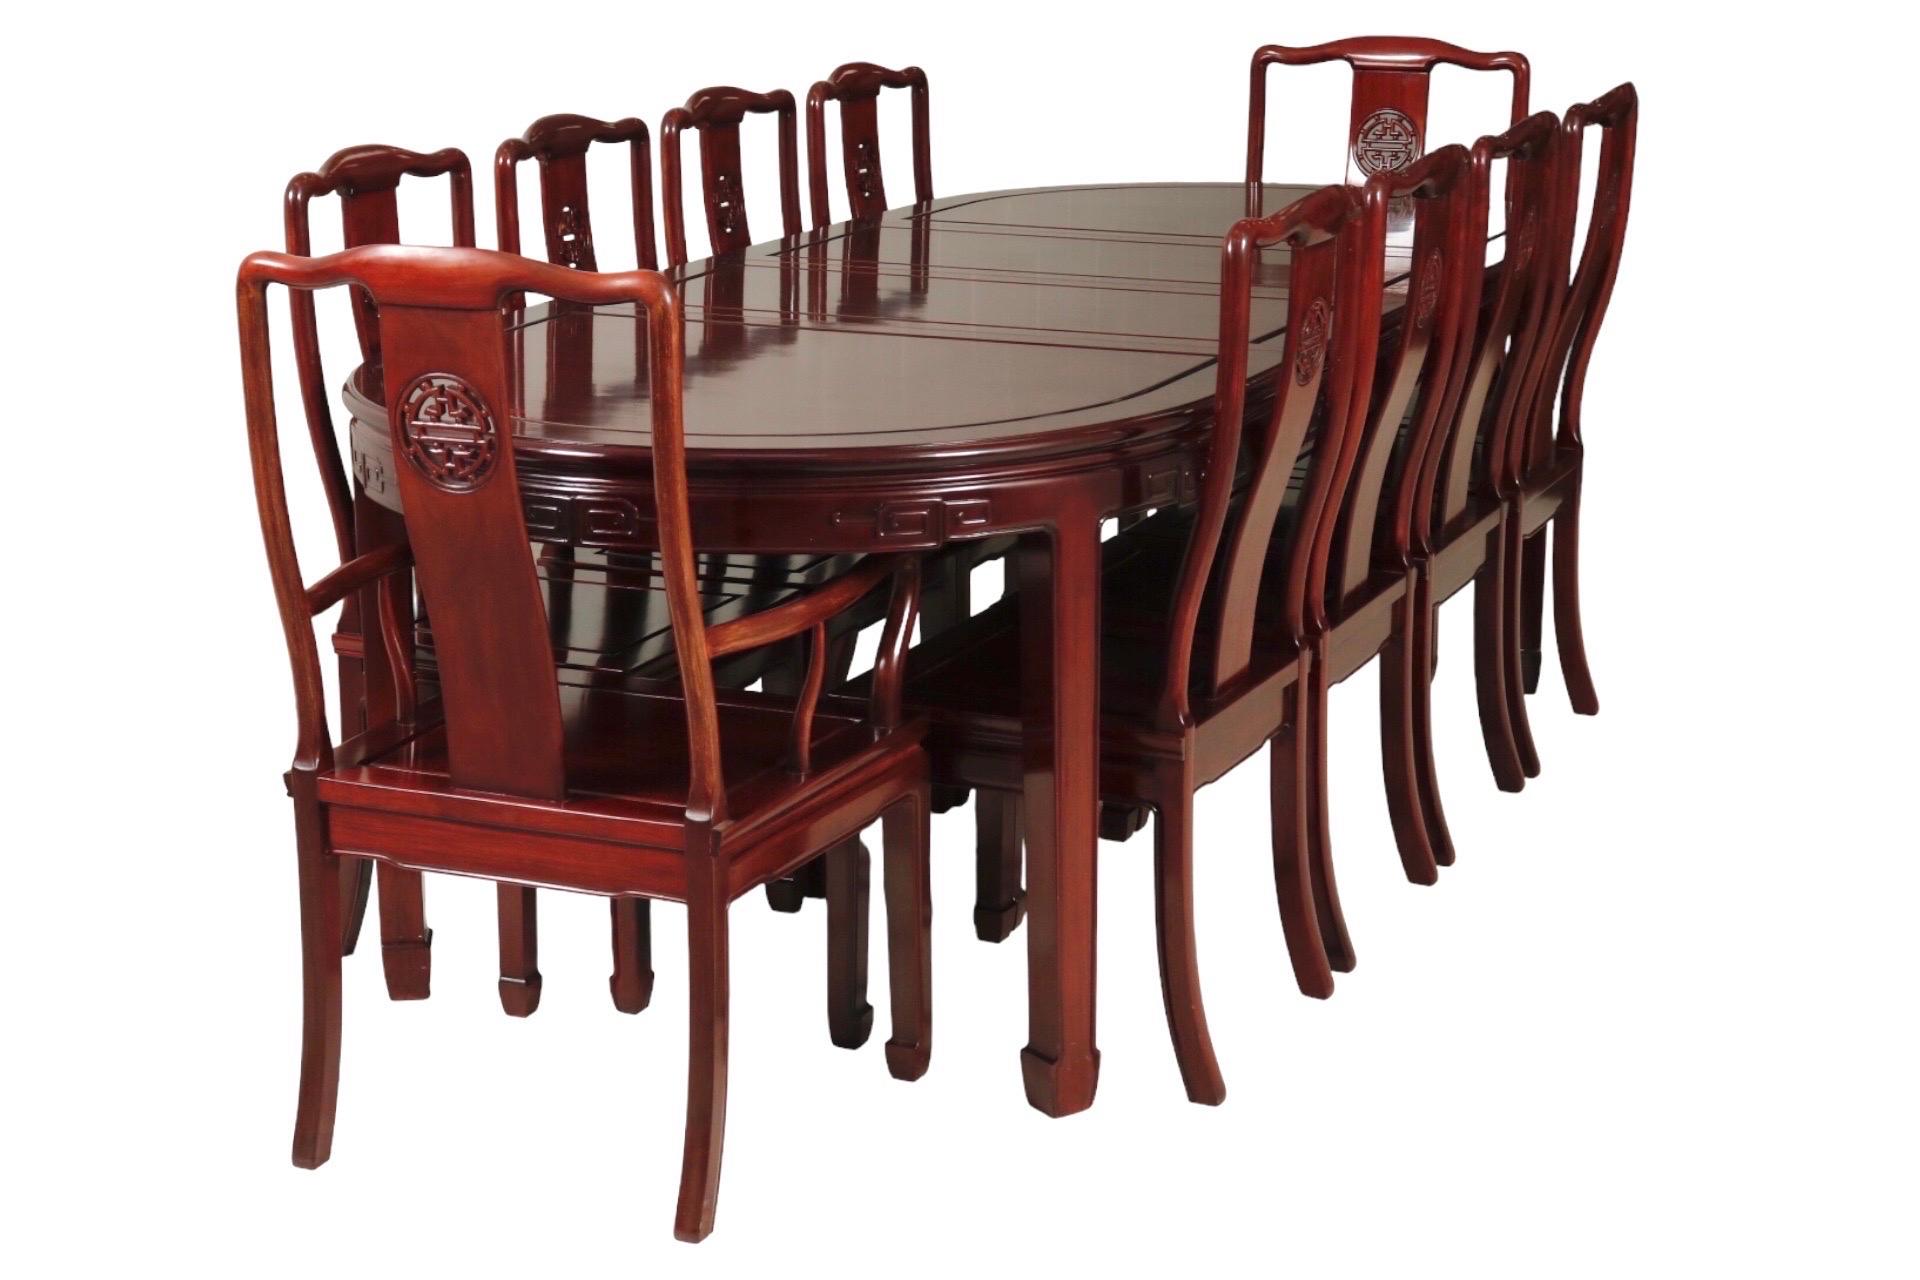 A Ming style dining table and ten chairs made of solid rosewood. The oval shaped table has beveled panels and is decorated with squared scrolls on the skirt. Extends with two leaves to comfortably seat ten, seats six without leaves. Two captain's